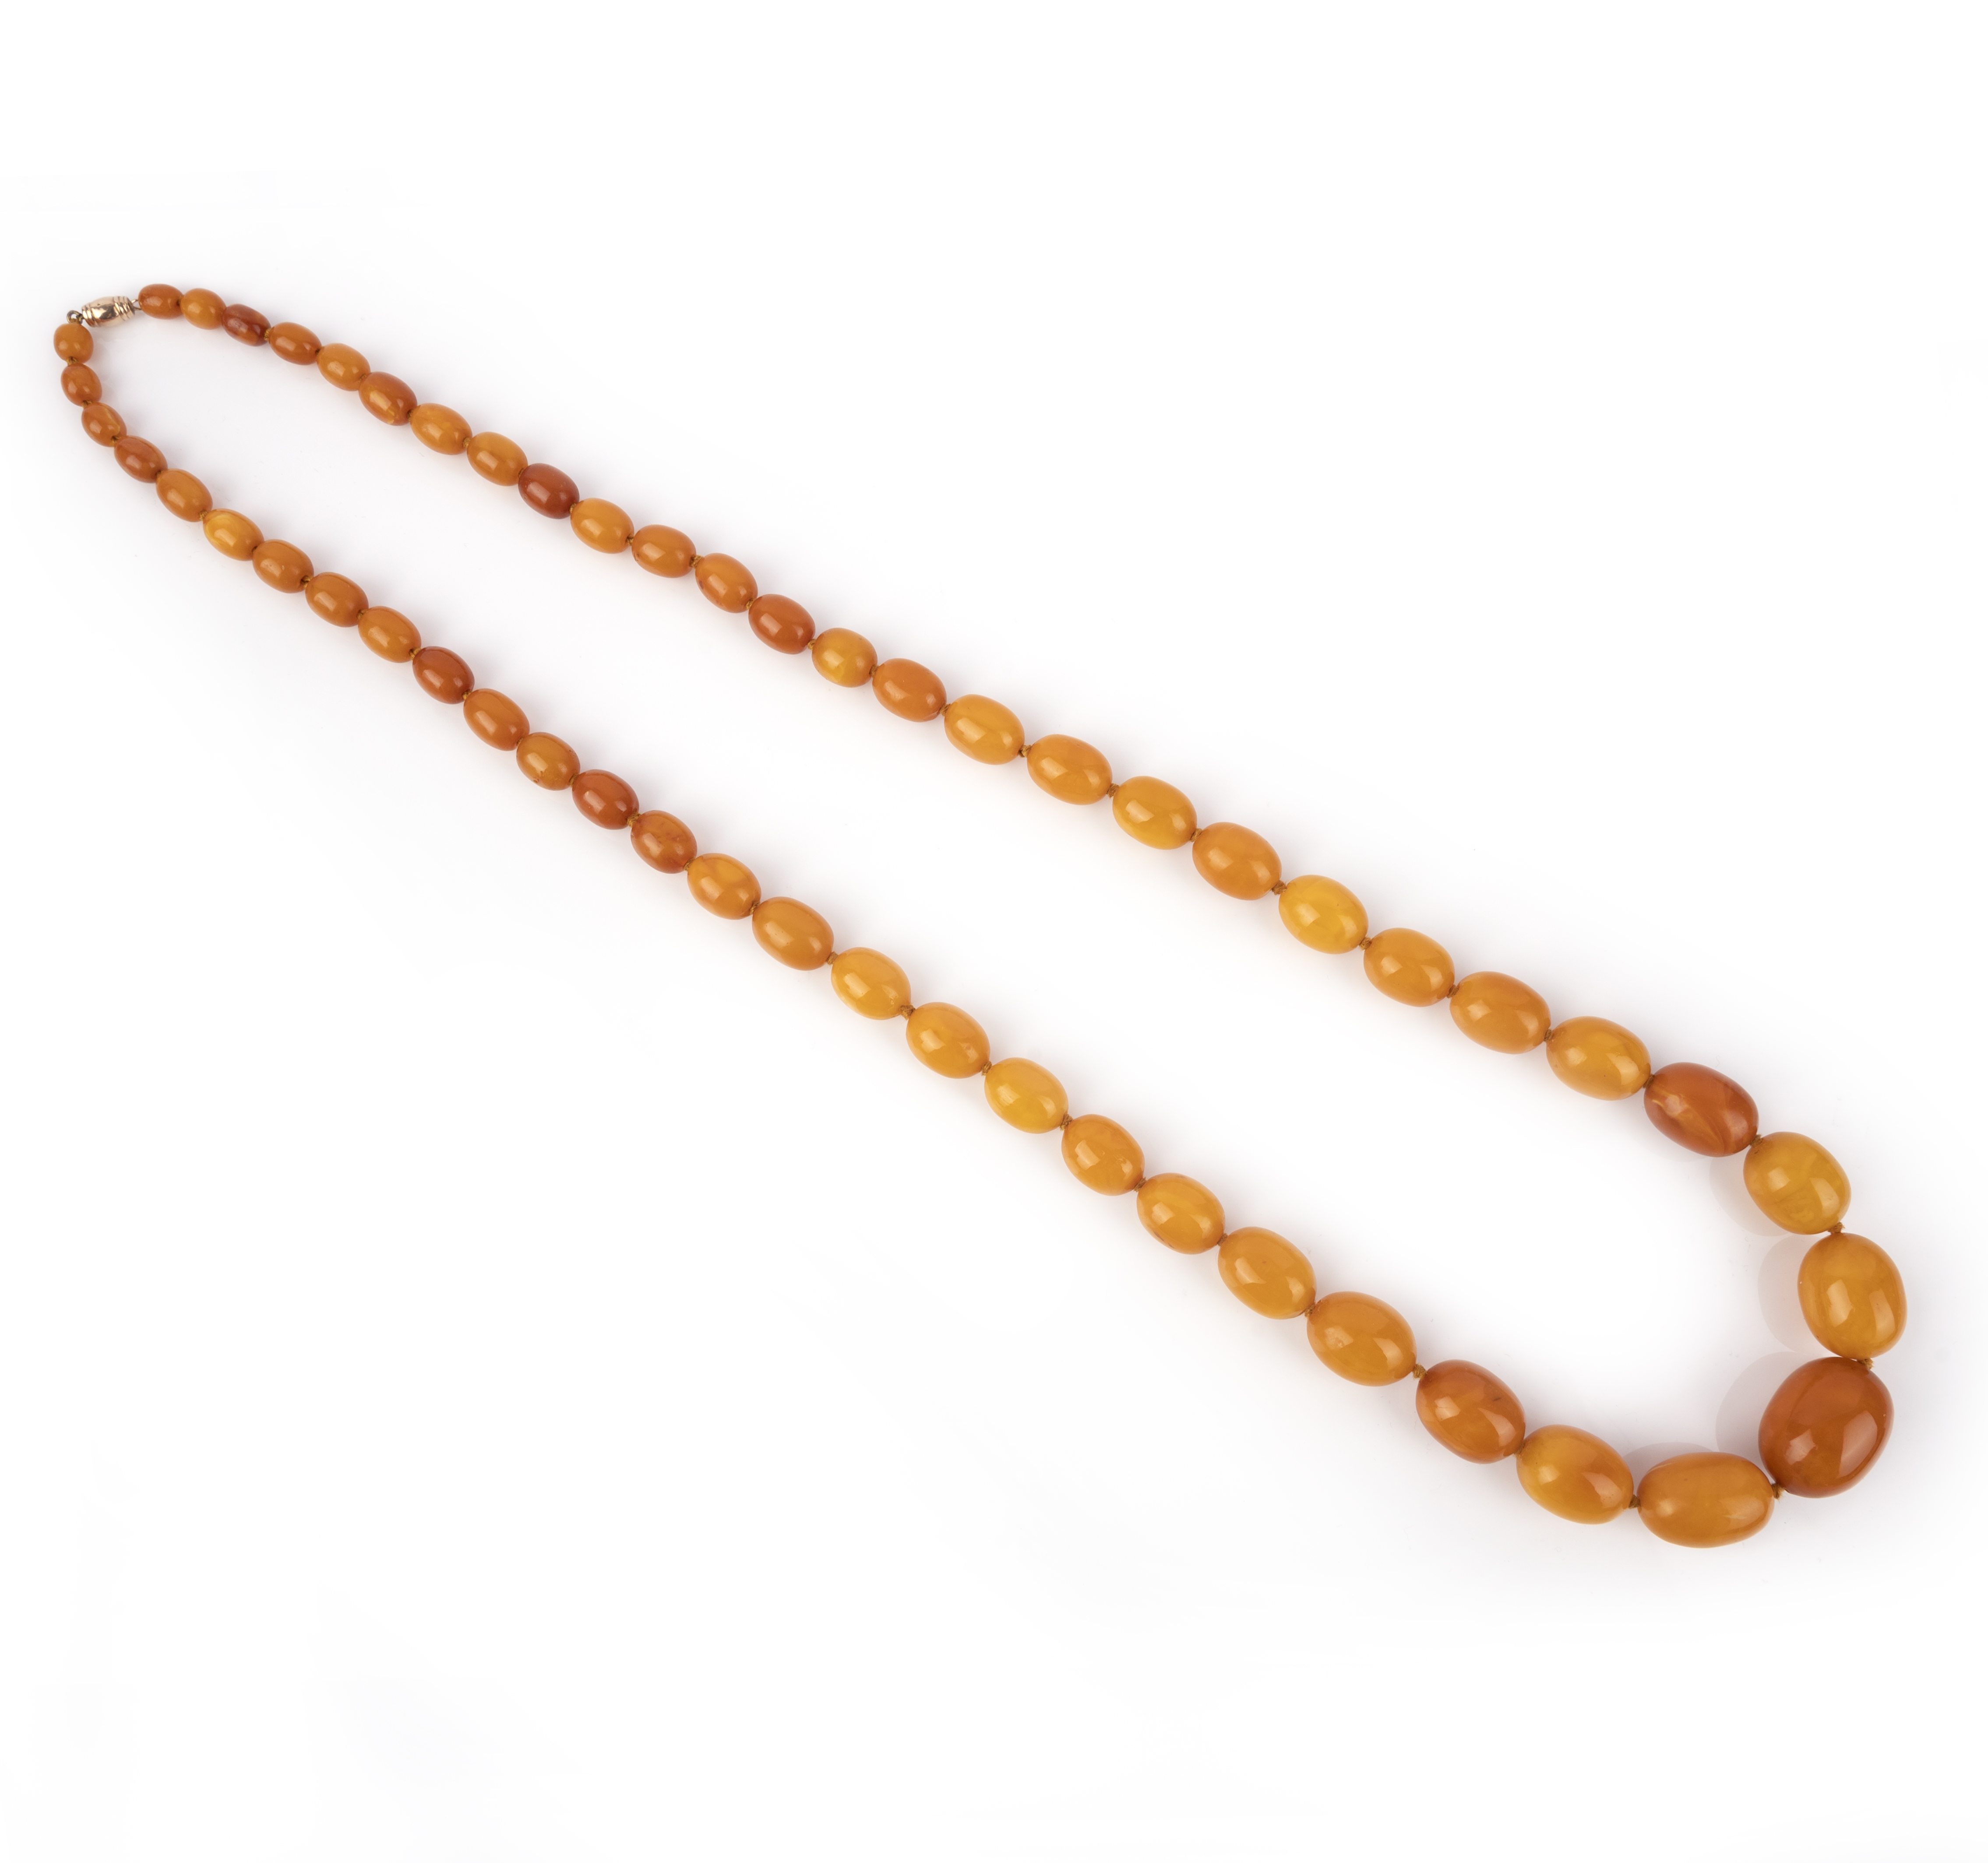 An amber bead necklace, composed of graduated oval amber beads, the largest measuring 2.7 x 2.0 x